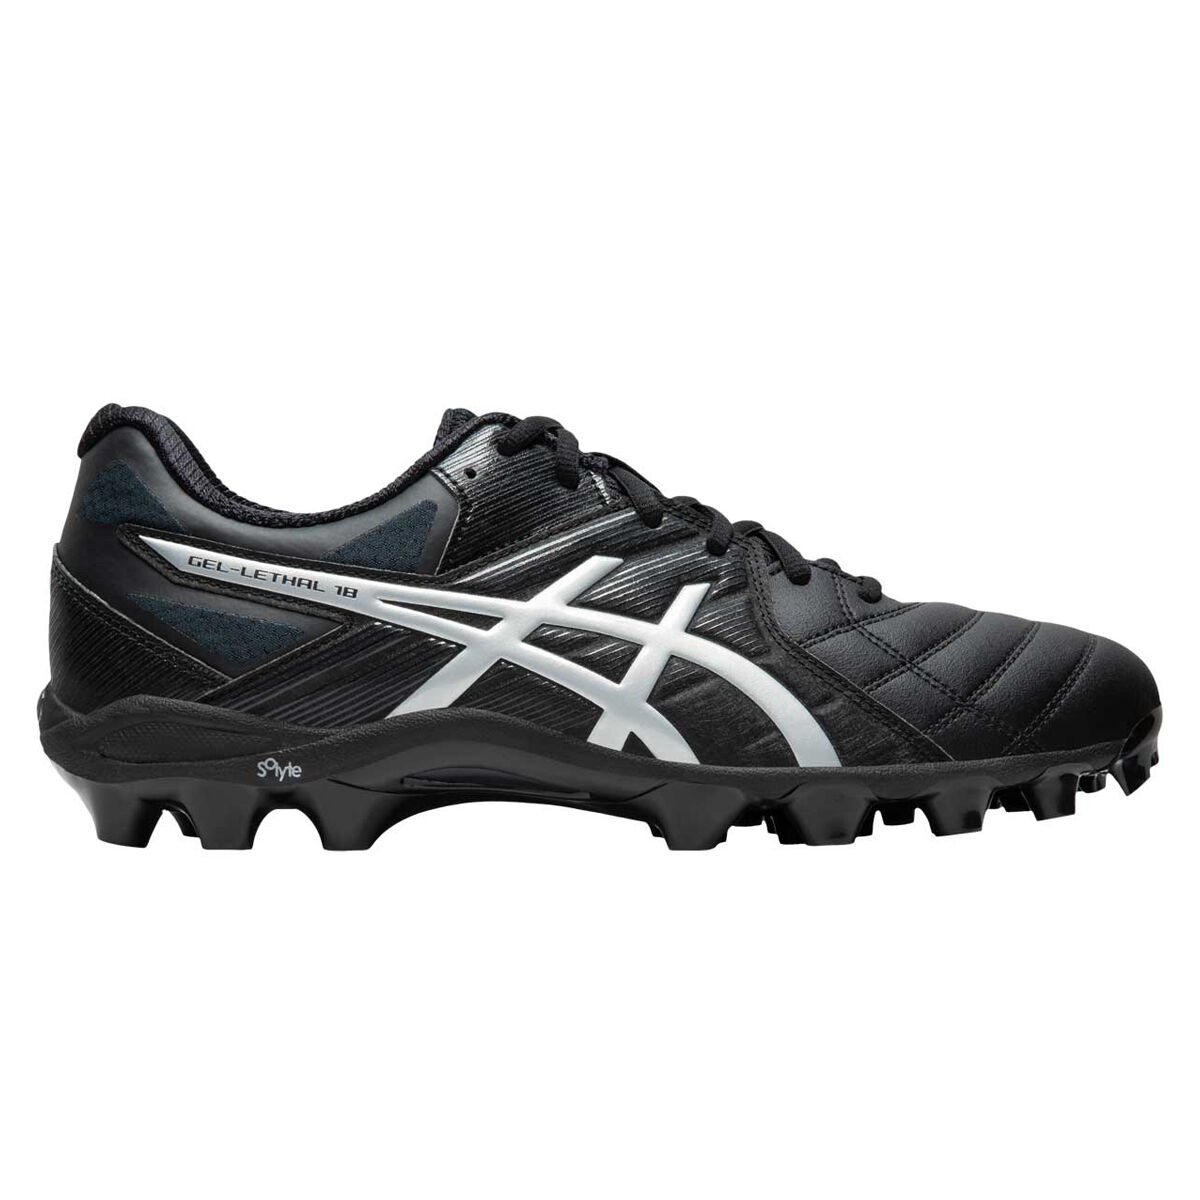 Asics GEL Lethal 18 Football Boots 